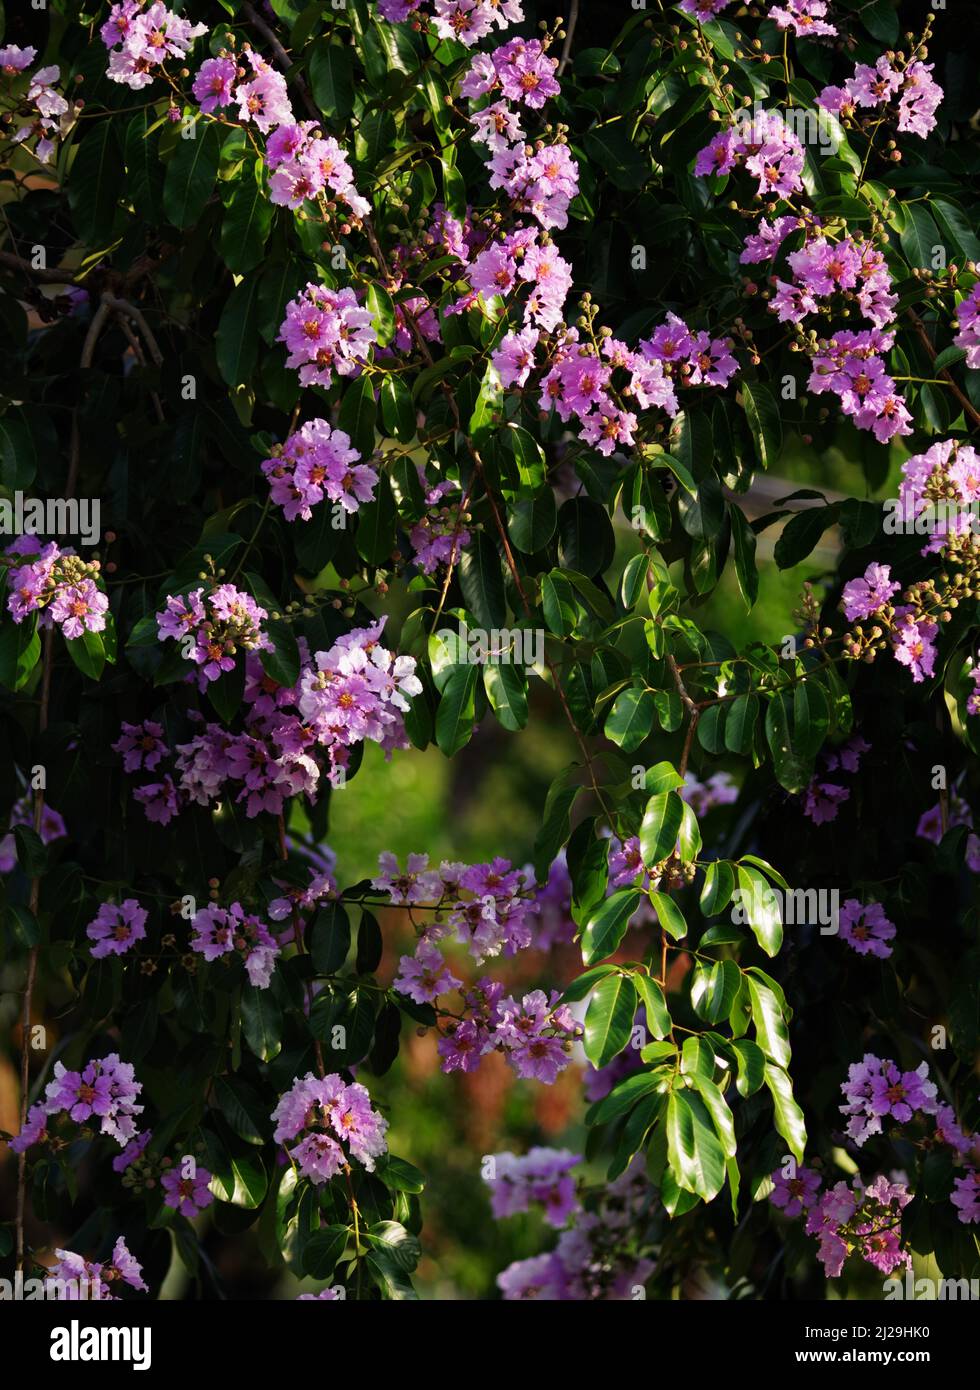 The magenta flowers with green leaves of the Pride of India tree Stock Photo